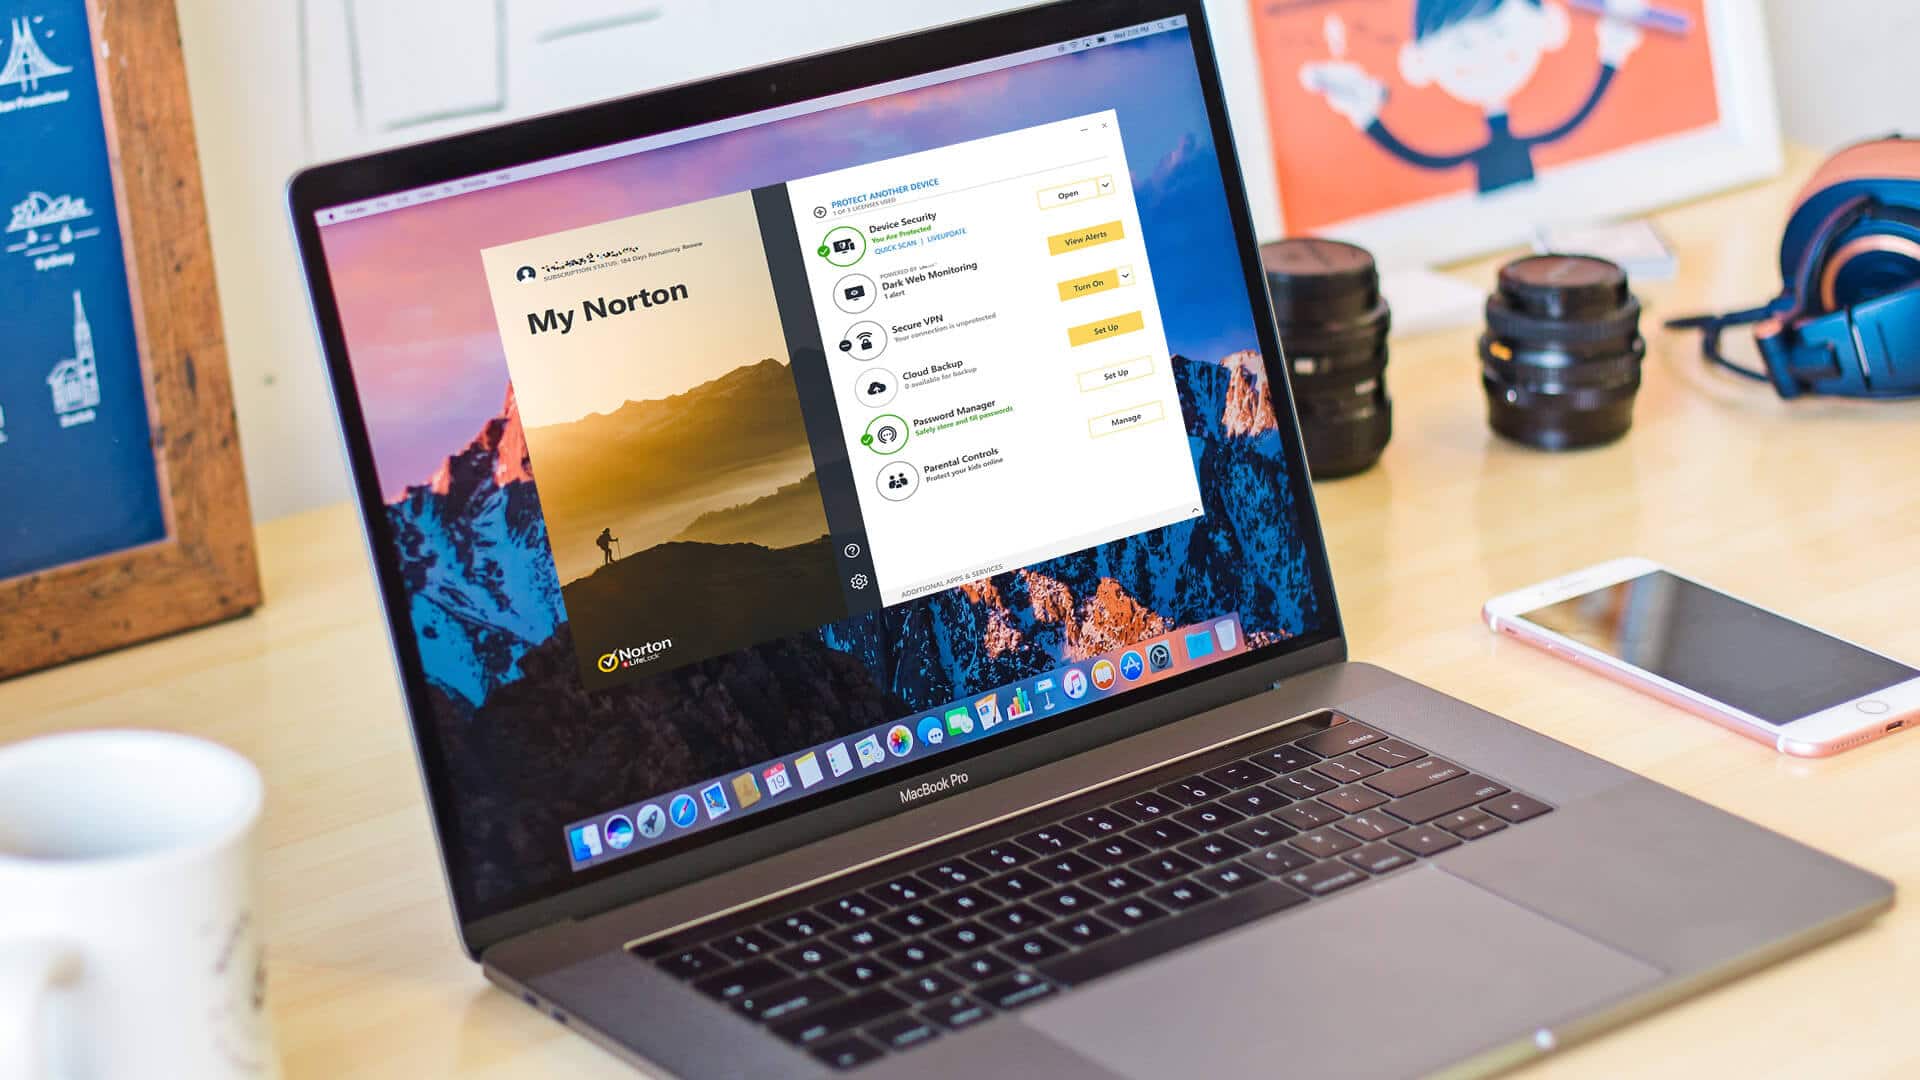 best internet security 2017 for mac